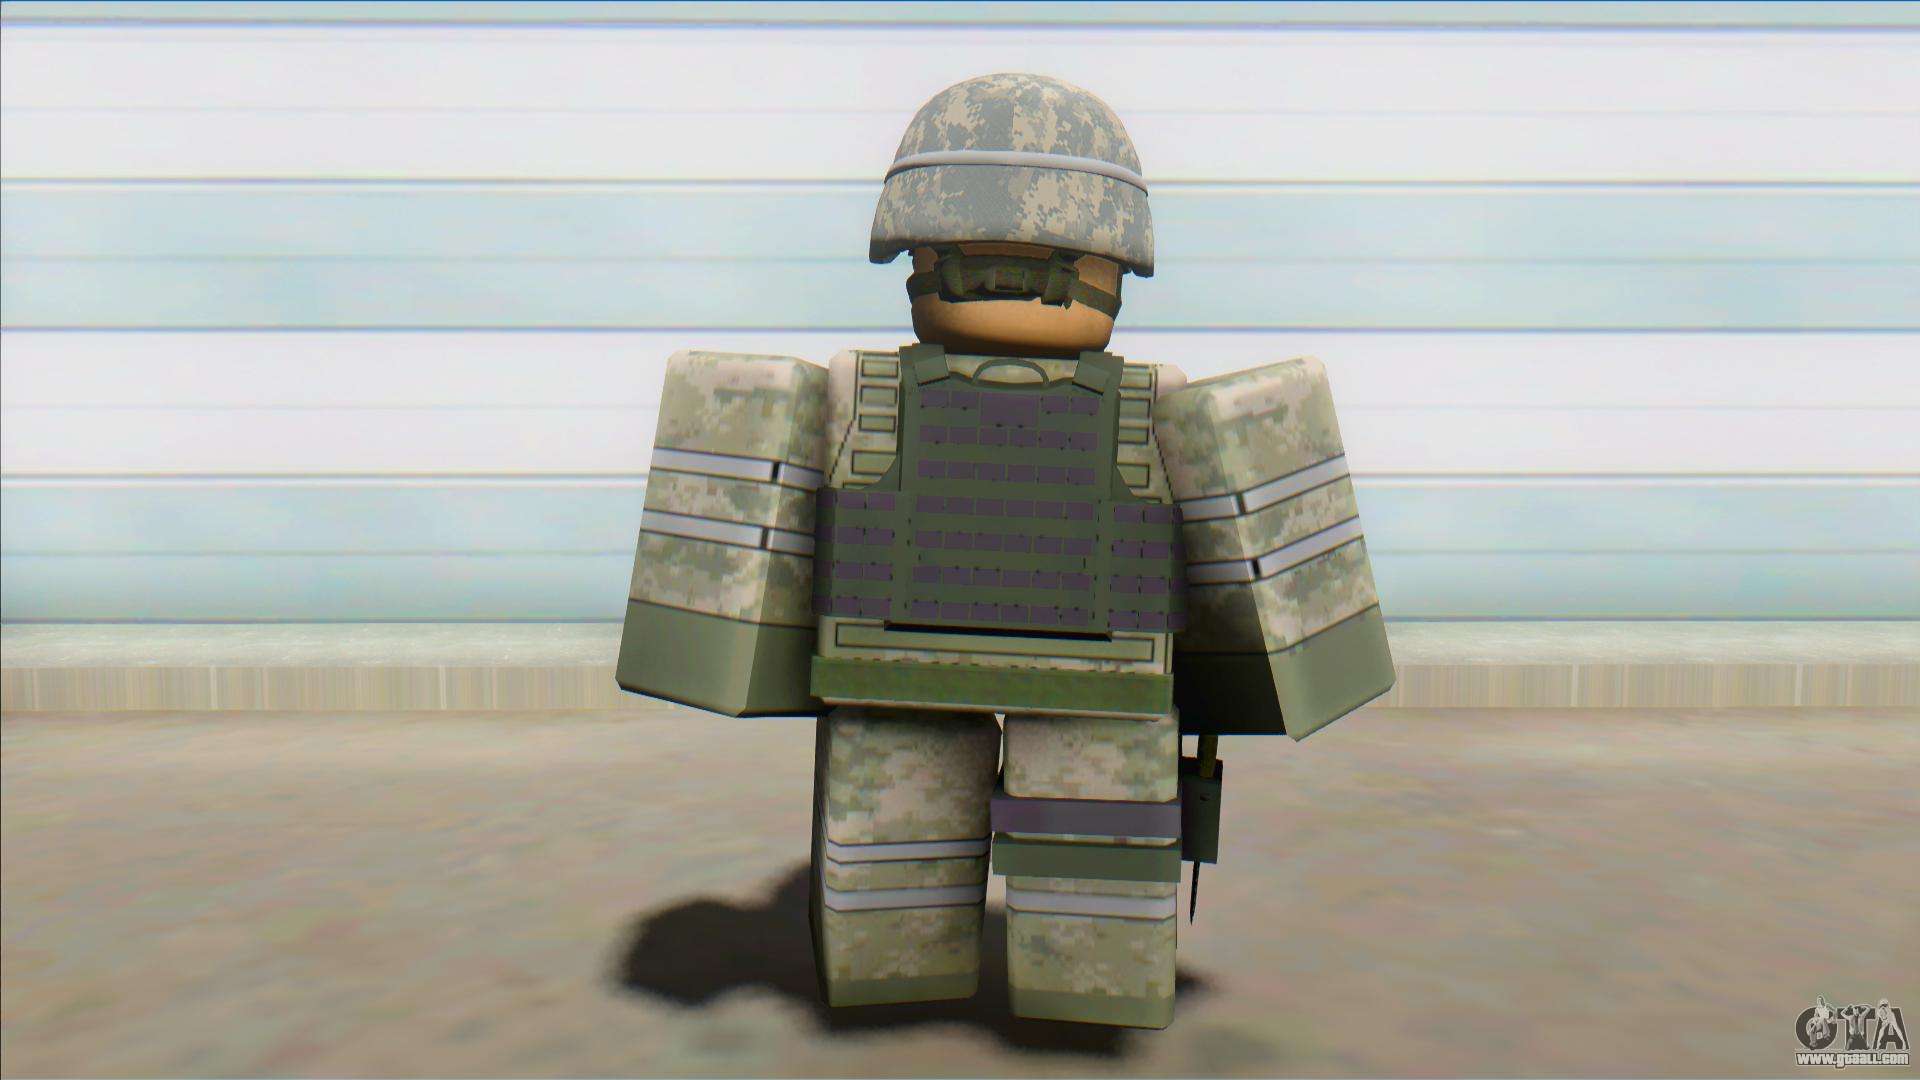 R O B L O X M I L I T A R Y G A M E S Zonealarm Results - military rp games roblox